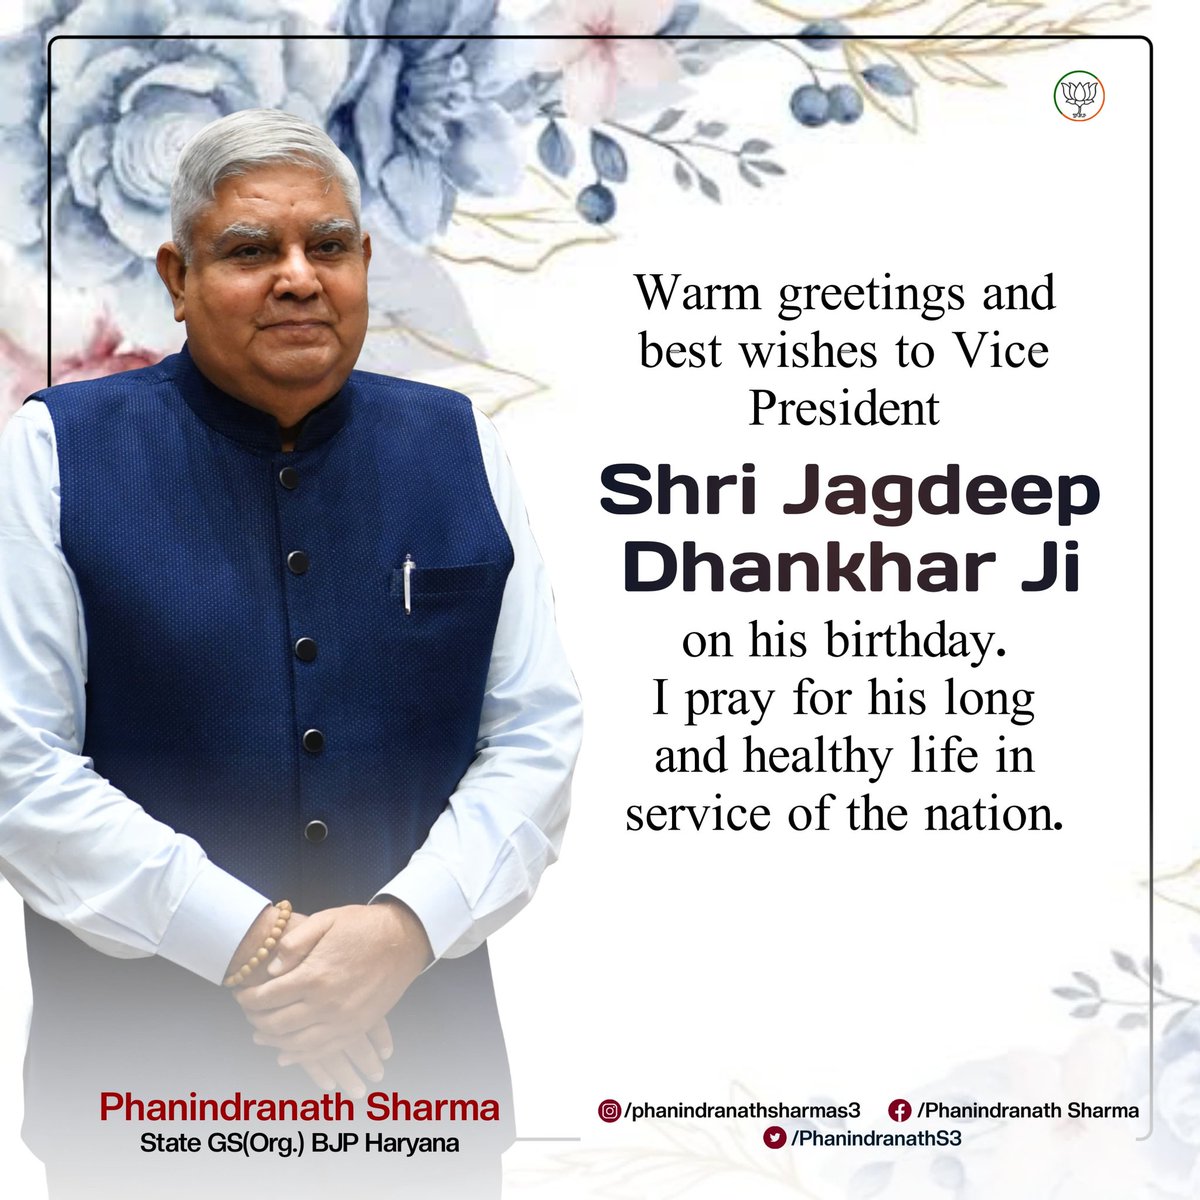 Warm greetings and best wishes to Vice President of India Shri Jagdeep Dhankhar Ji on his birthday. I pray for his long and healthy life in service of the nation. @VPIndia